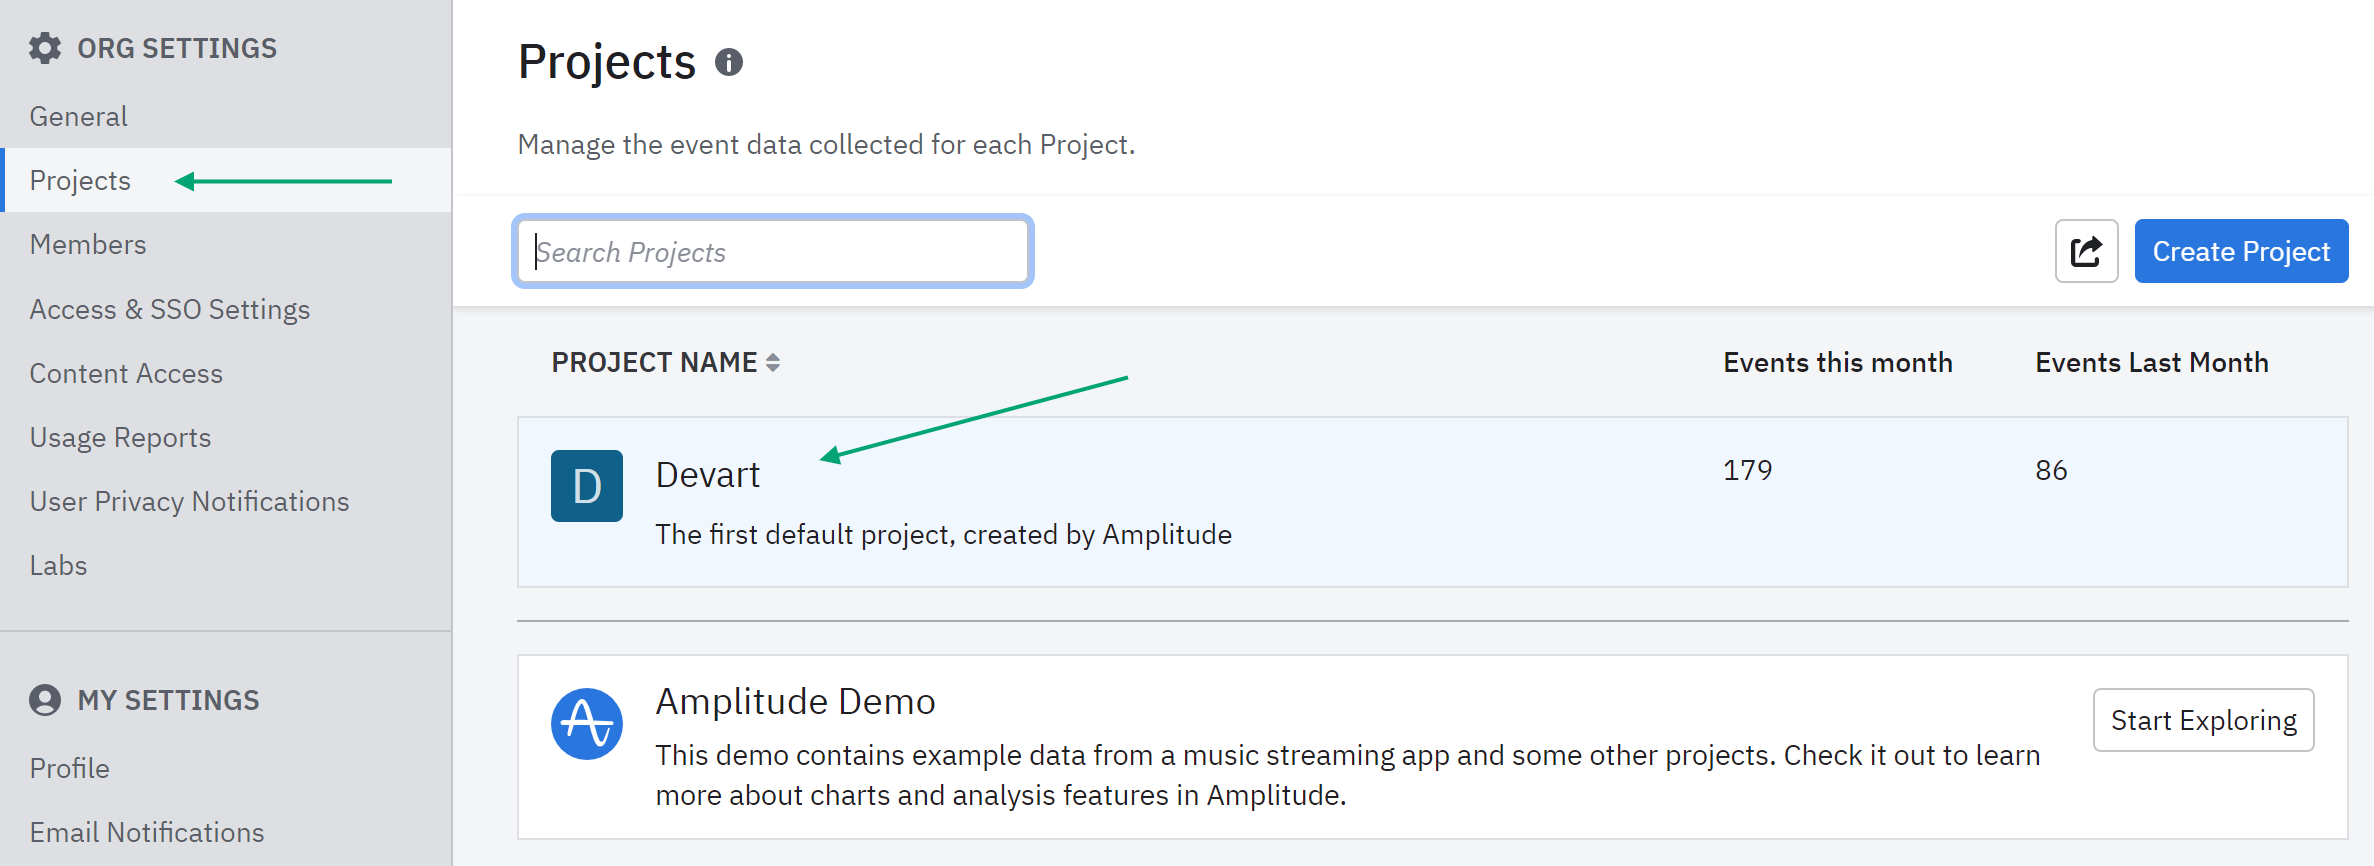 Amplitude projects